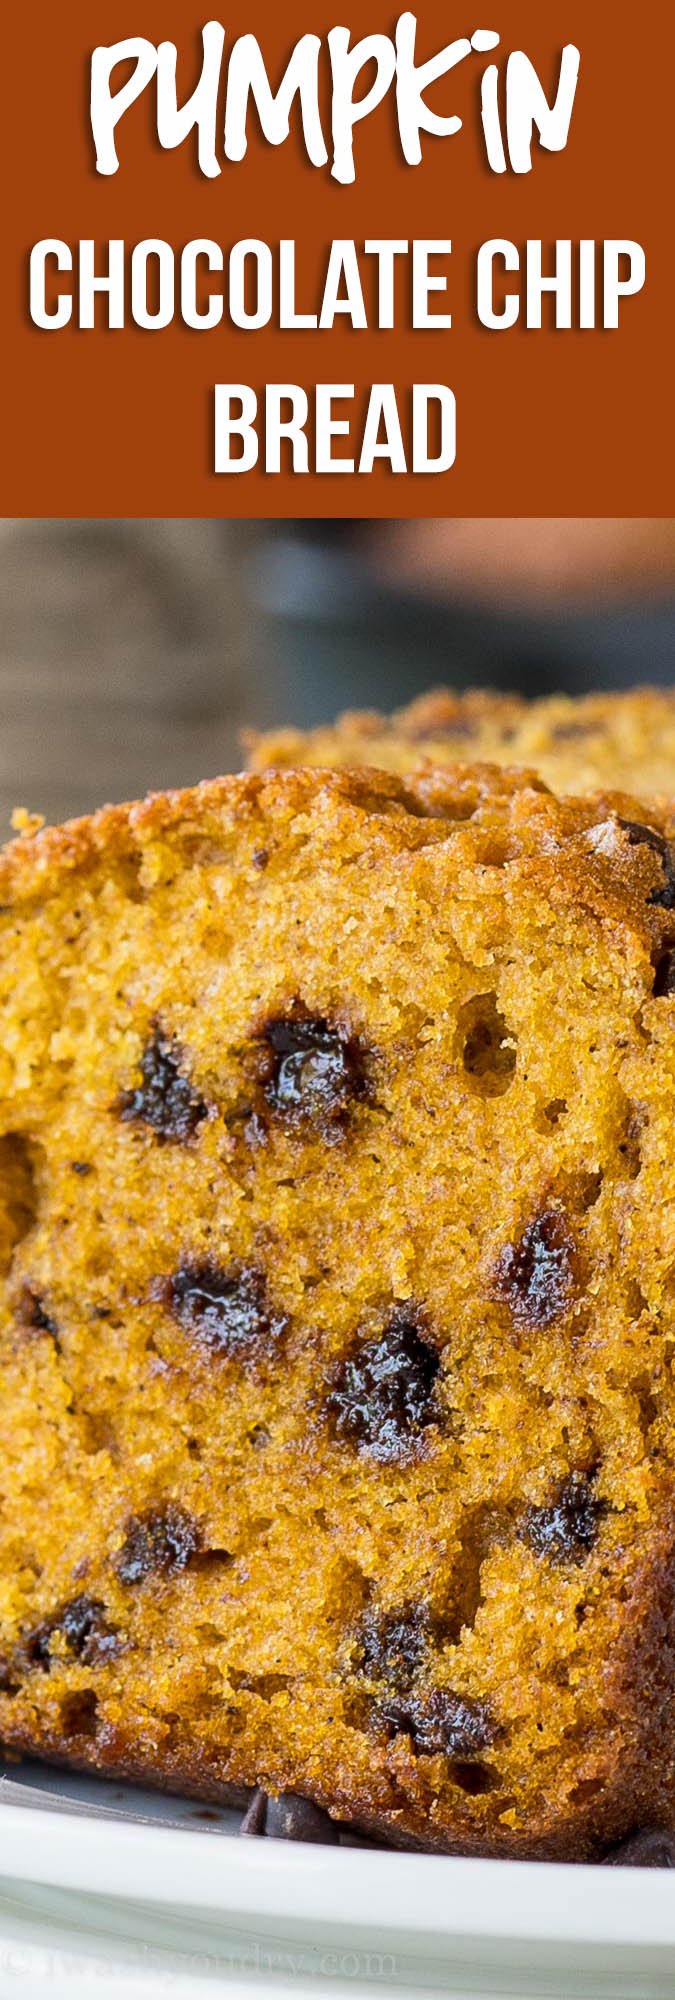 This Pumpkin Chocolate Chip Bread is a perfect holiday gift!  So moist and perfectly sweet with this pumpkin pie spice!